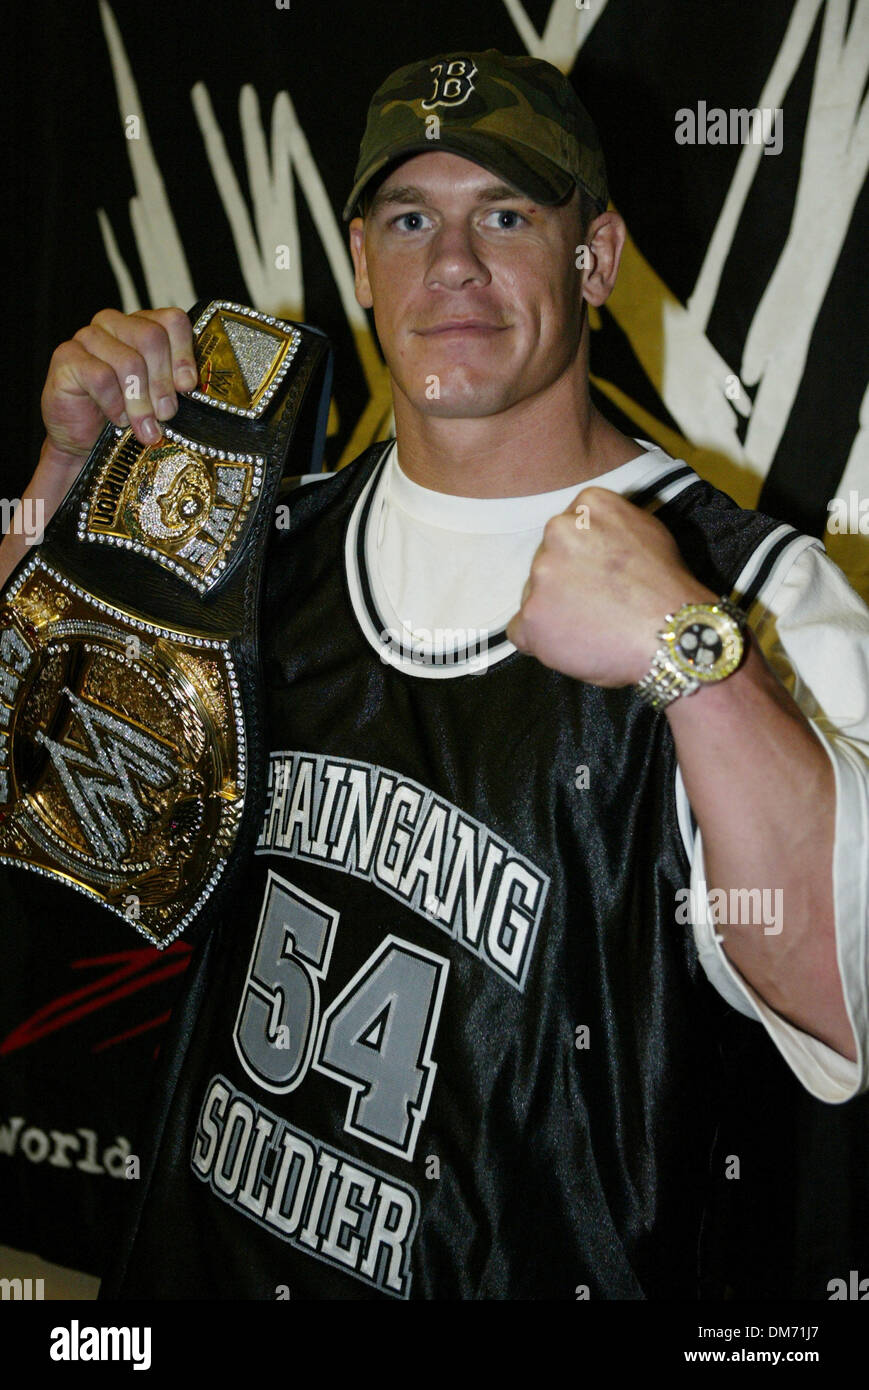 Jun 21, 2005; Las Vegas, NV, USA; WWE Champion JOHN CENA with Championship Belt at the WWE press conference at the Thomas and Mack Center in Las Vegas for the up coming 'Vengeance' Pay Per View on June 26, 2005. Mandatory Credit: Photo by Mary Ann Owen/ZUMA Press. (©) Copyright 2005 by Mary Ann Owen Stock Photo